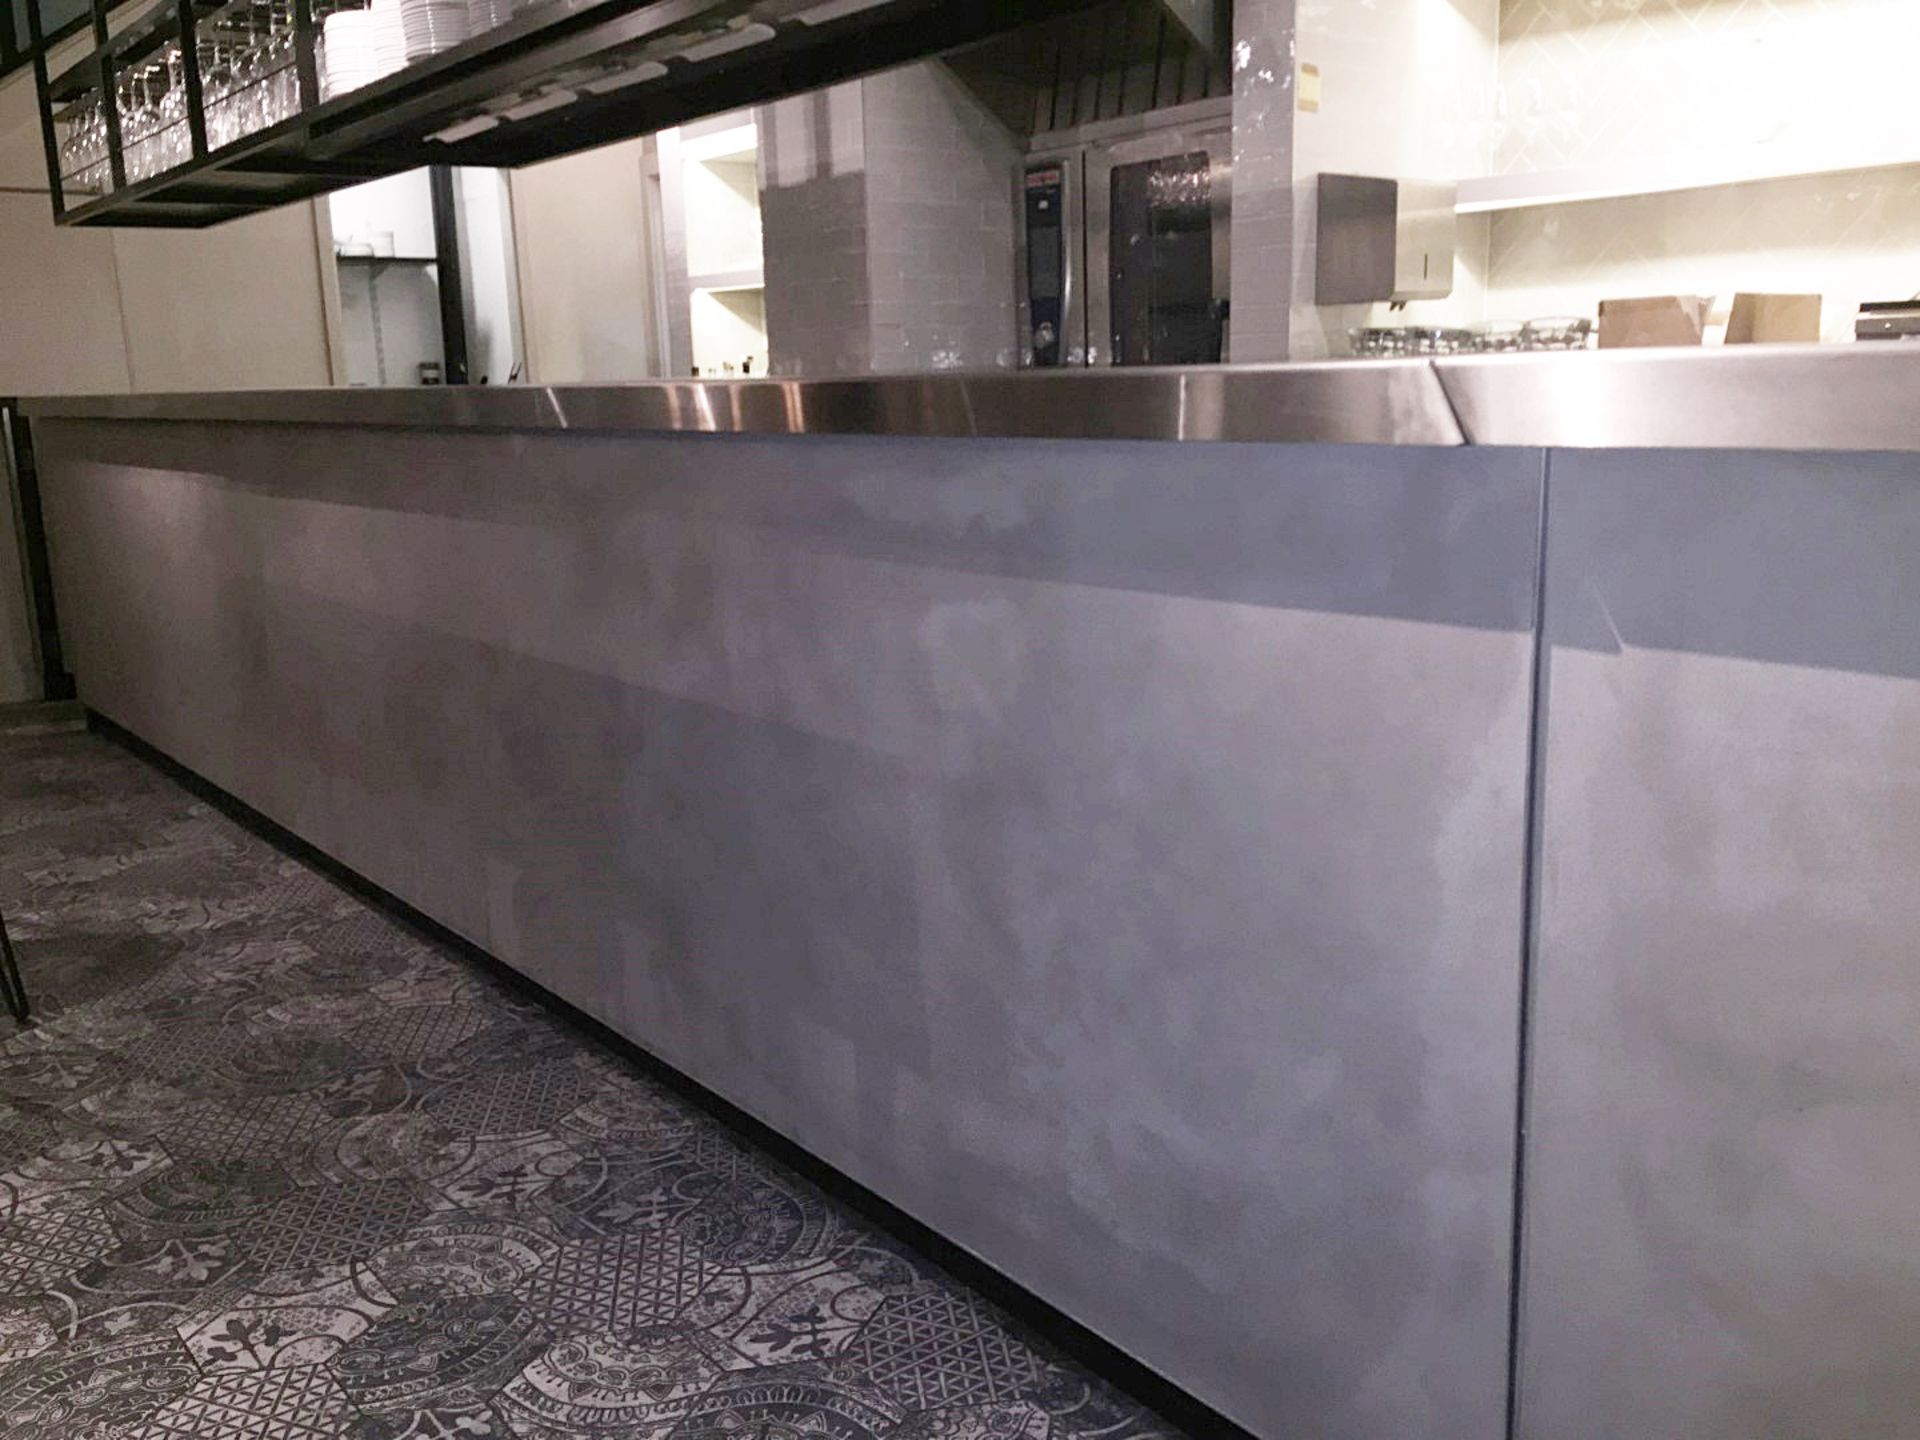 1 x Restaurant Serving Counter Featuring Stainless Steel Top And Hatches At Both Ends - Originally I - Image 7 of 11